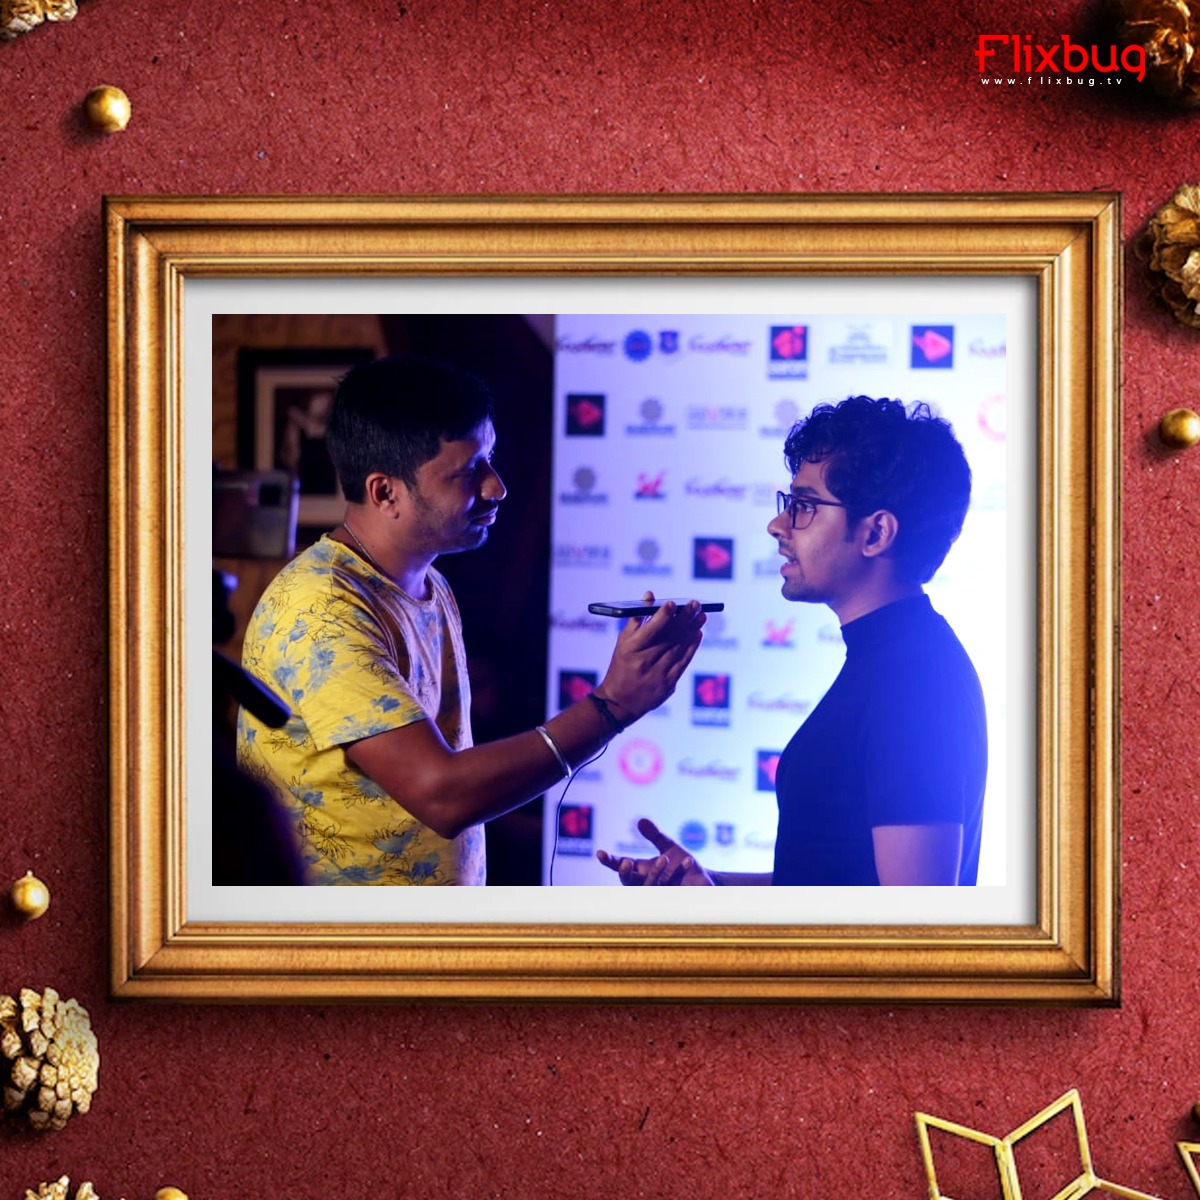 In the Frame with us, We have @riddhisen896! 

Framing our Grand Announcement & Trailer Launch Event of #Bismillah 
.
.
@kicpl 
.
.
#intheframe #grandannouncement #Bismillahcast #film #bengalifilm #bengaliactor #movieactor #banglafilm #BanglaCinema #Event #Flixbug #Flixbugott